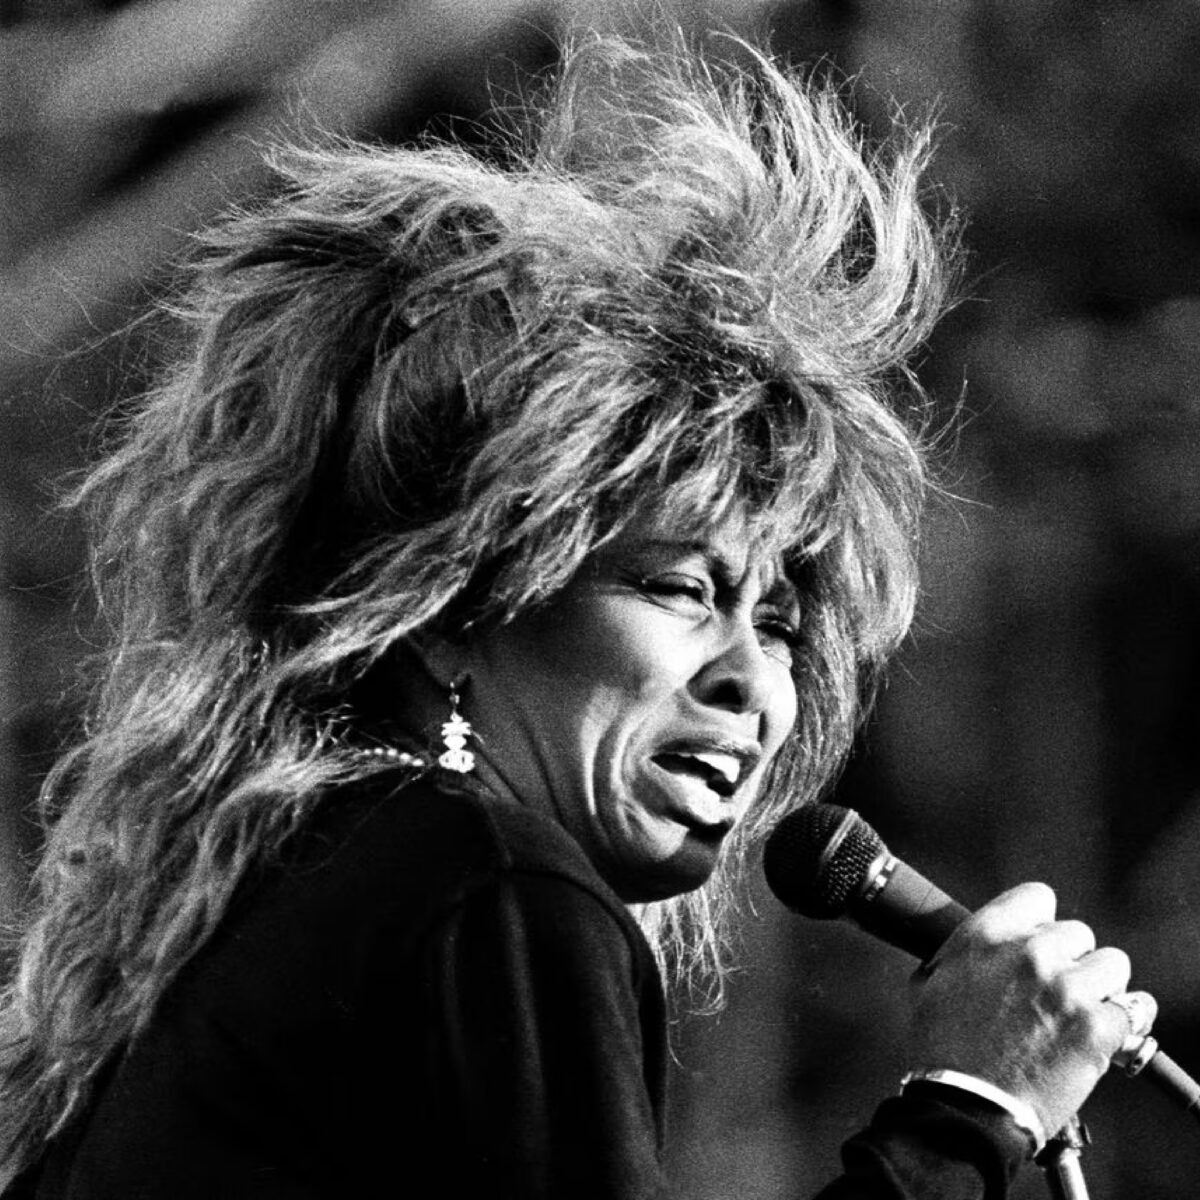 Tina Turner, The Queen Of Rock Dies at age of 83